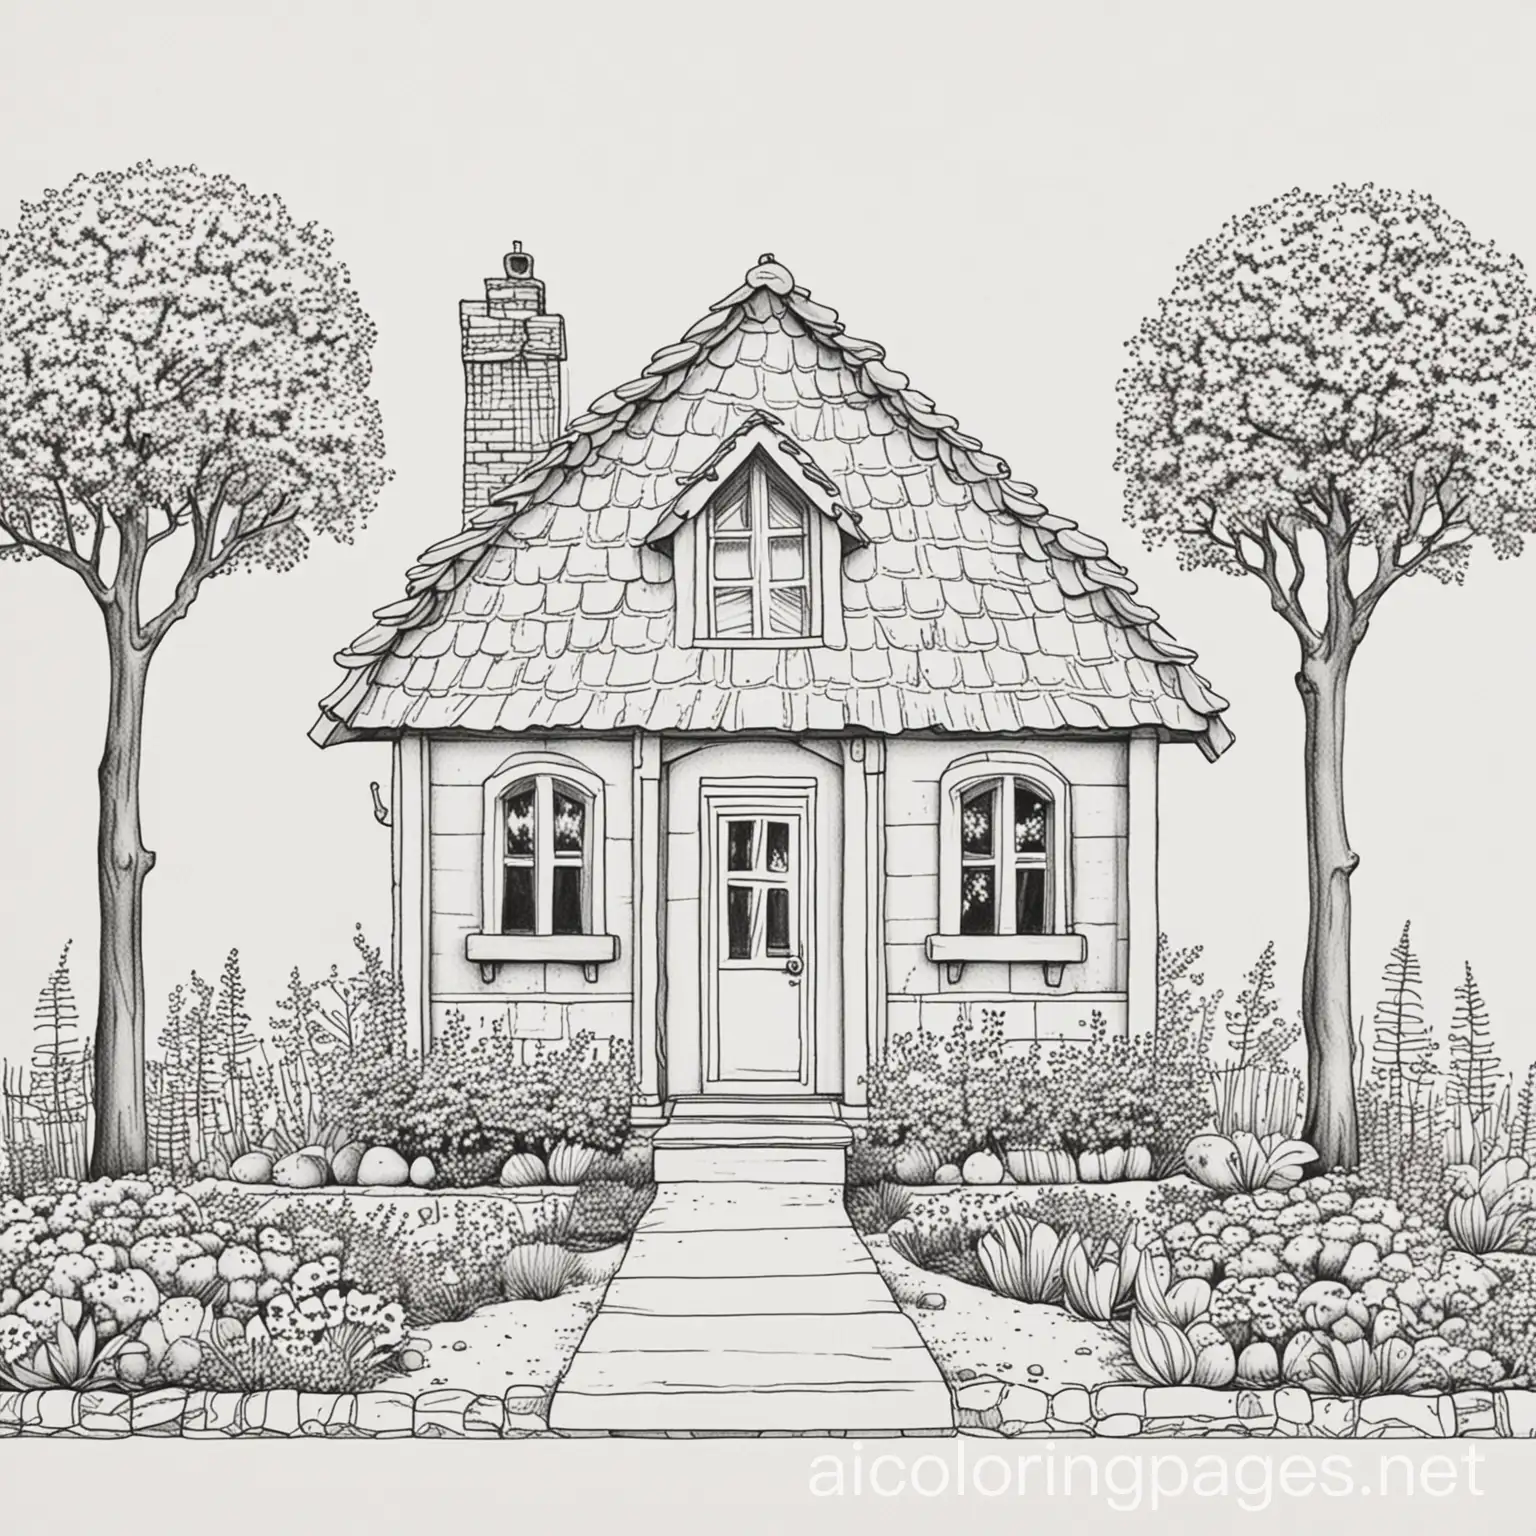 Simple-Black-and-White-Coloring-Page-of-a-Little-House-on-White-Background